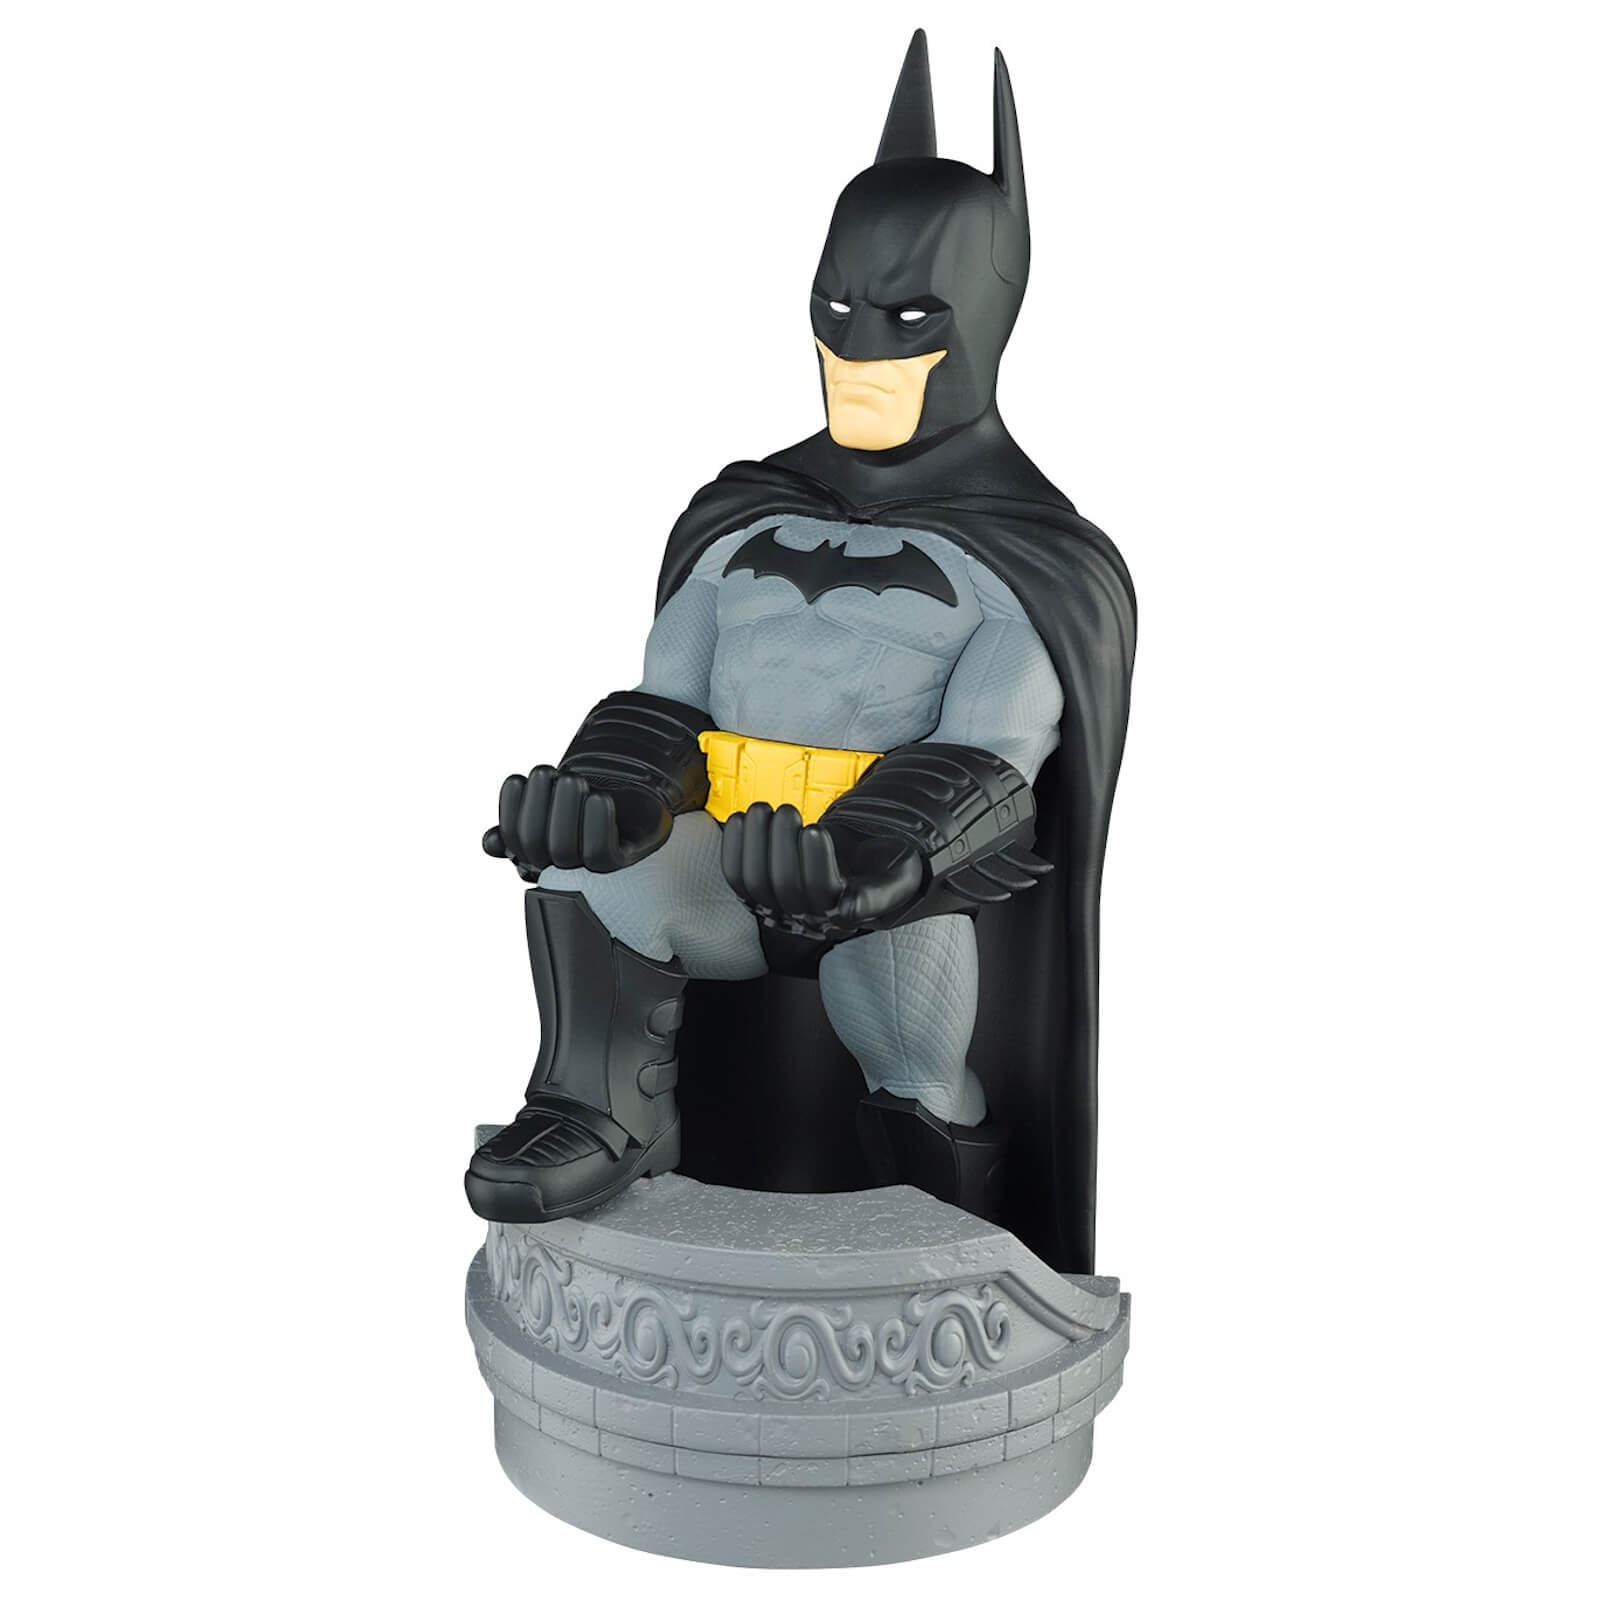 Image of Cable Guys DC Comics Batman Controller and Smartphone Stand